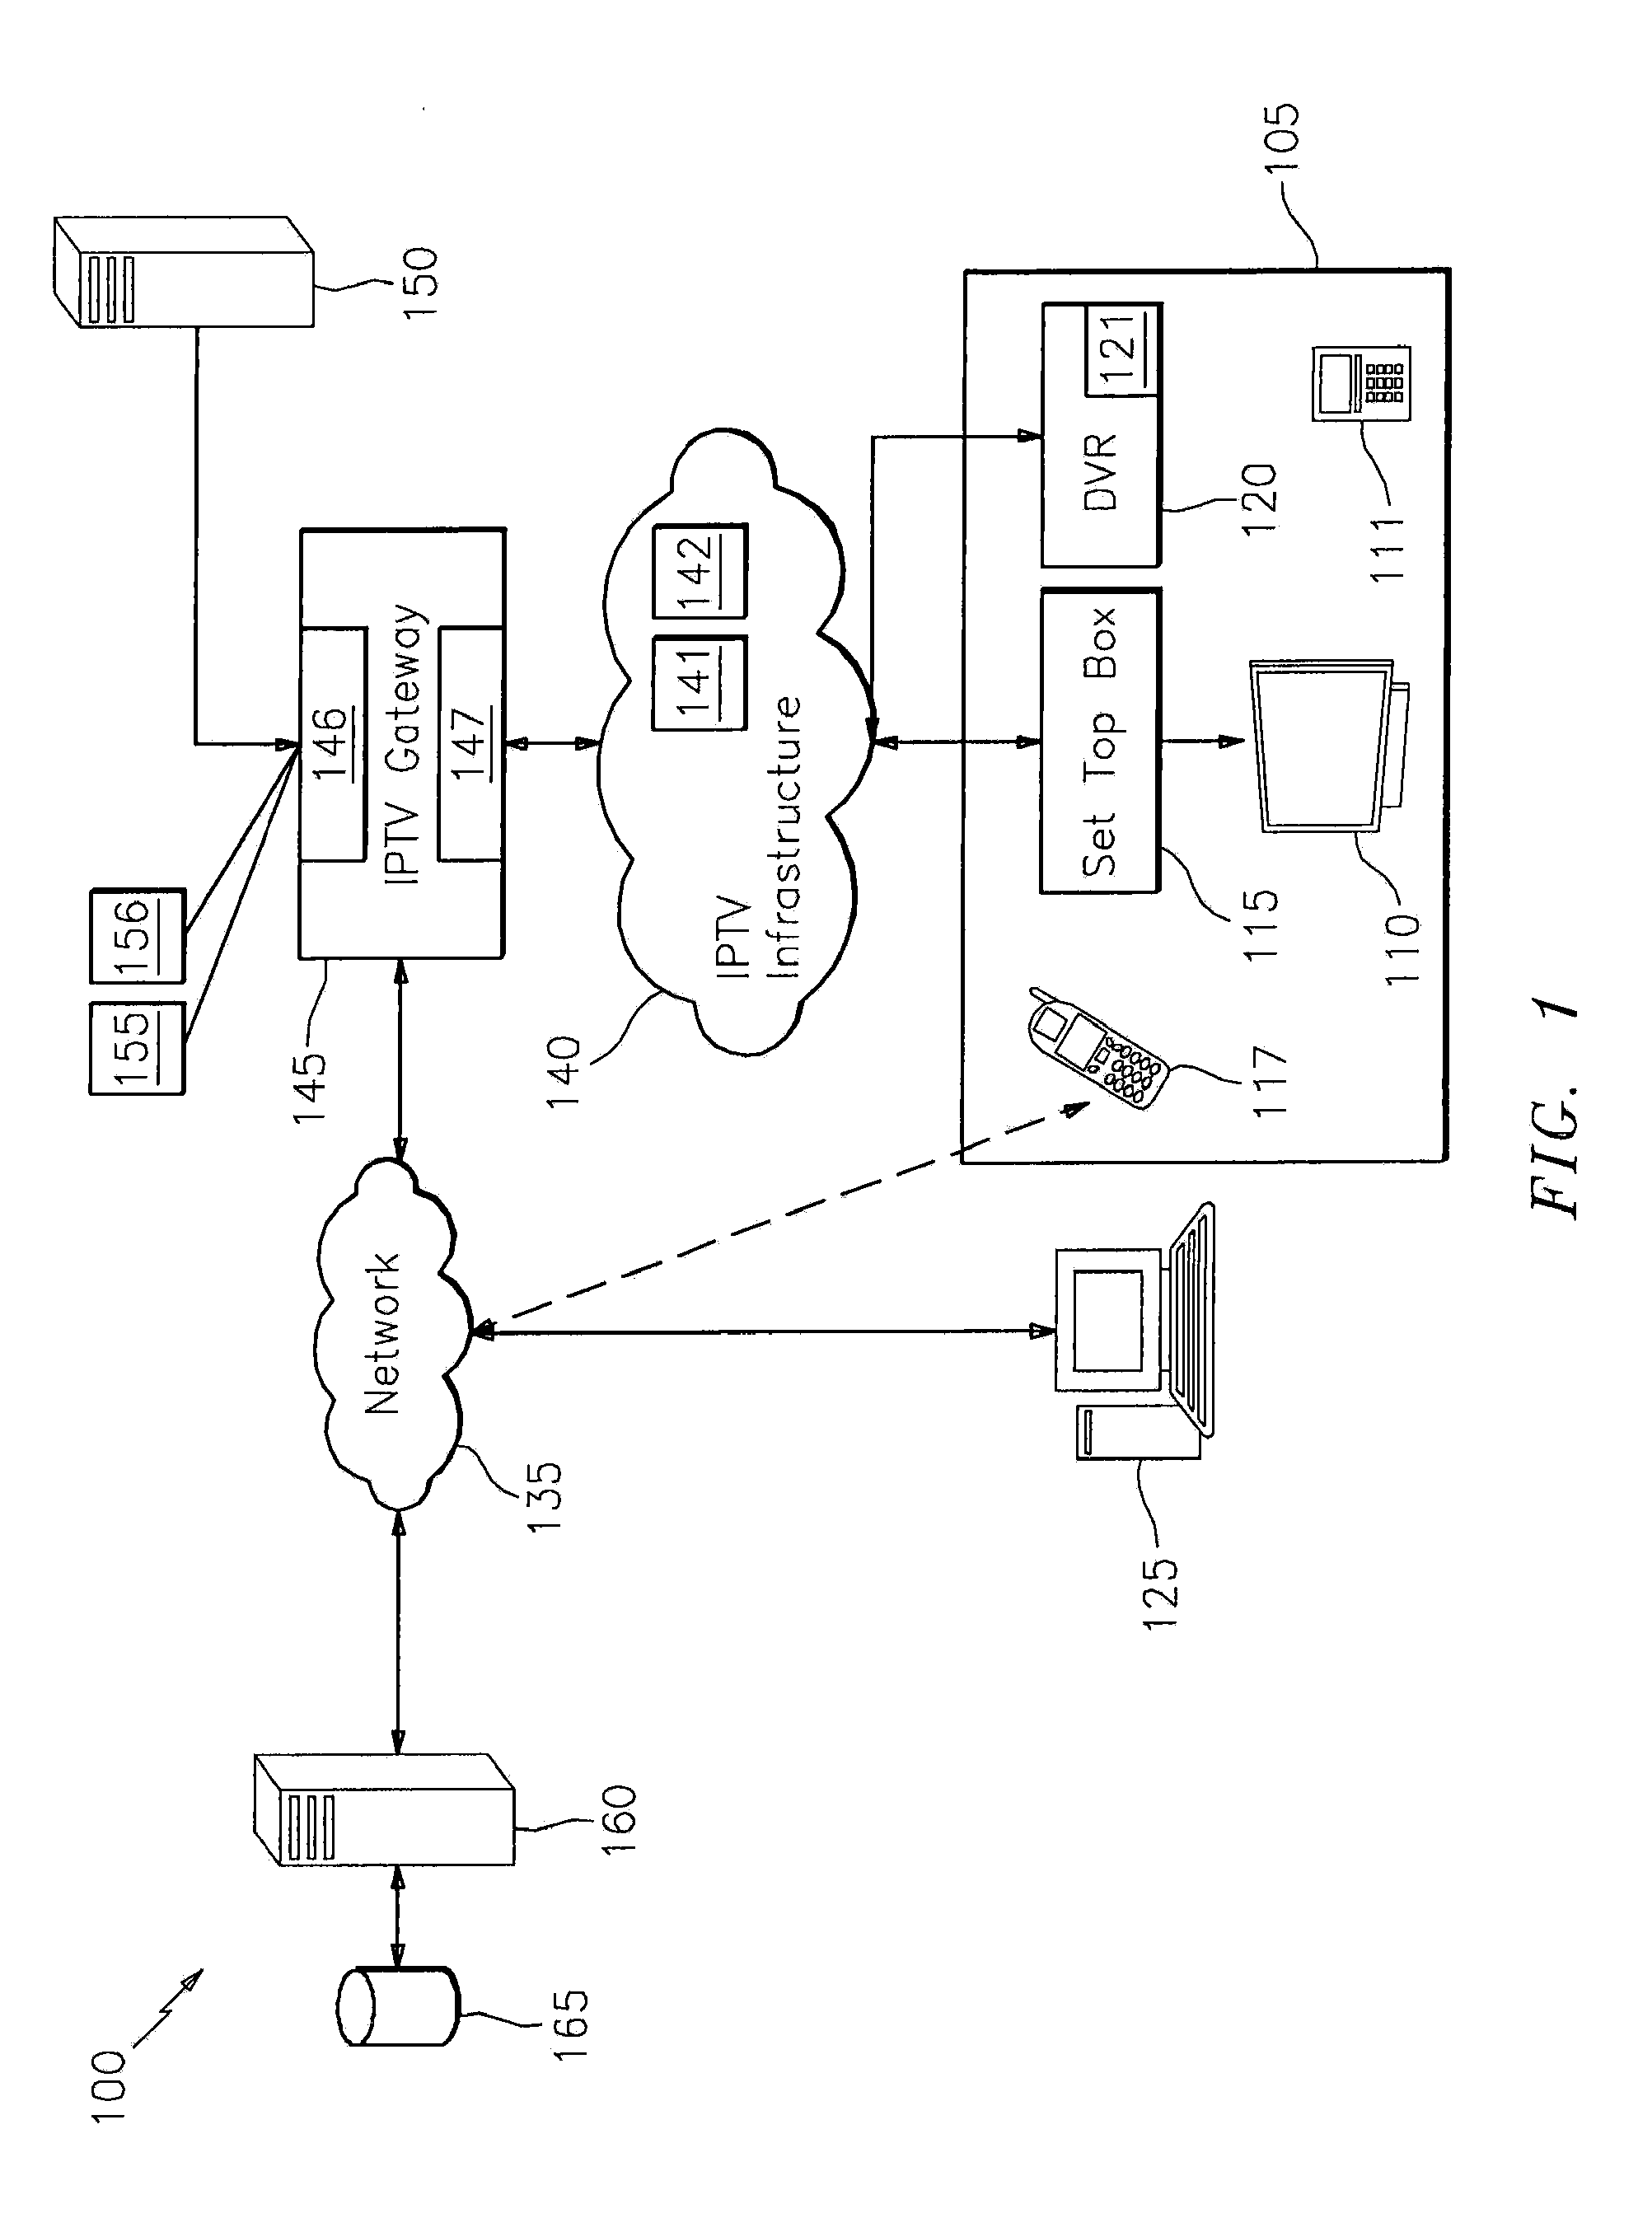 Systems, methods, and computer products for a customized remote recording interface